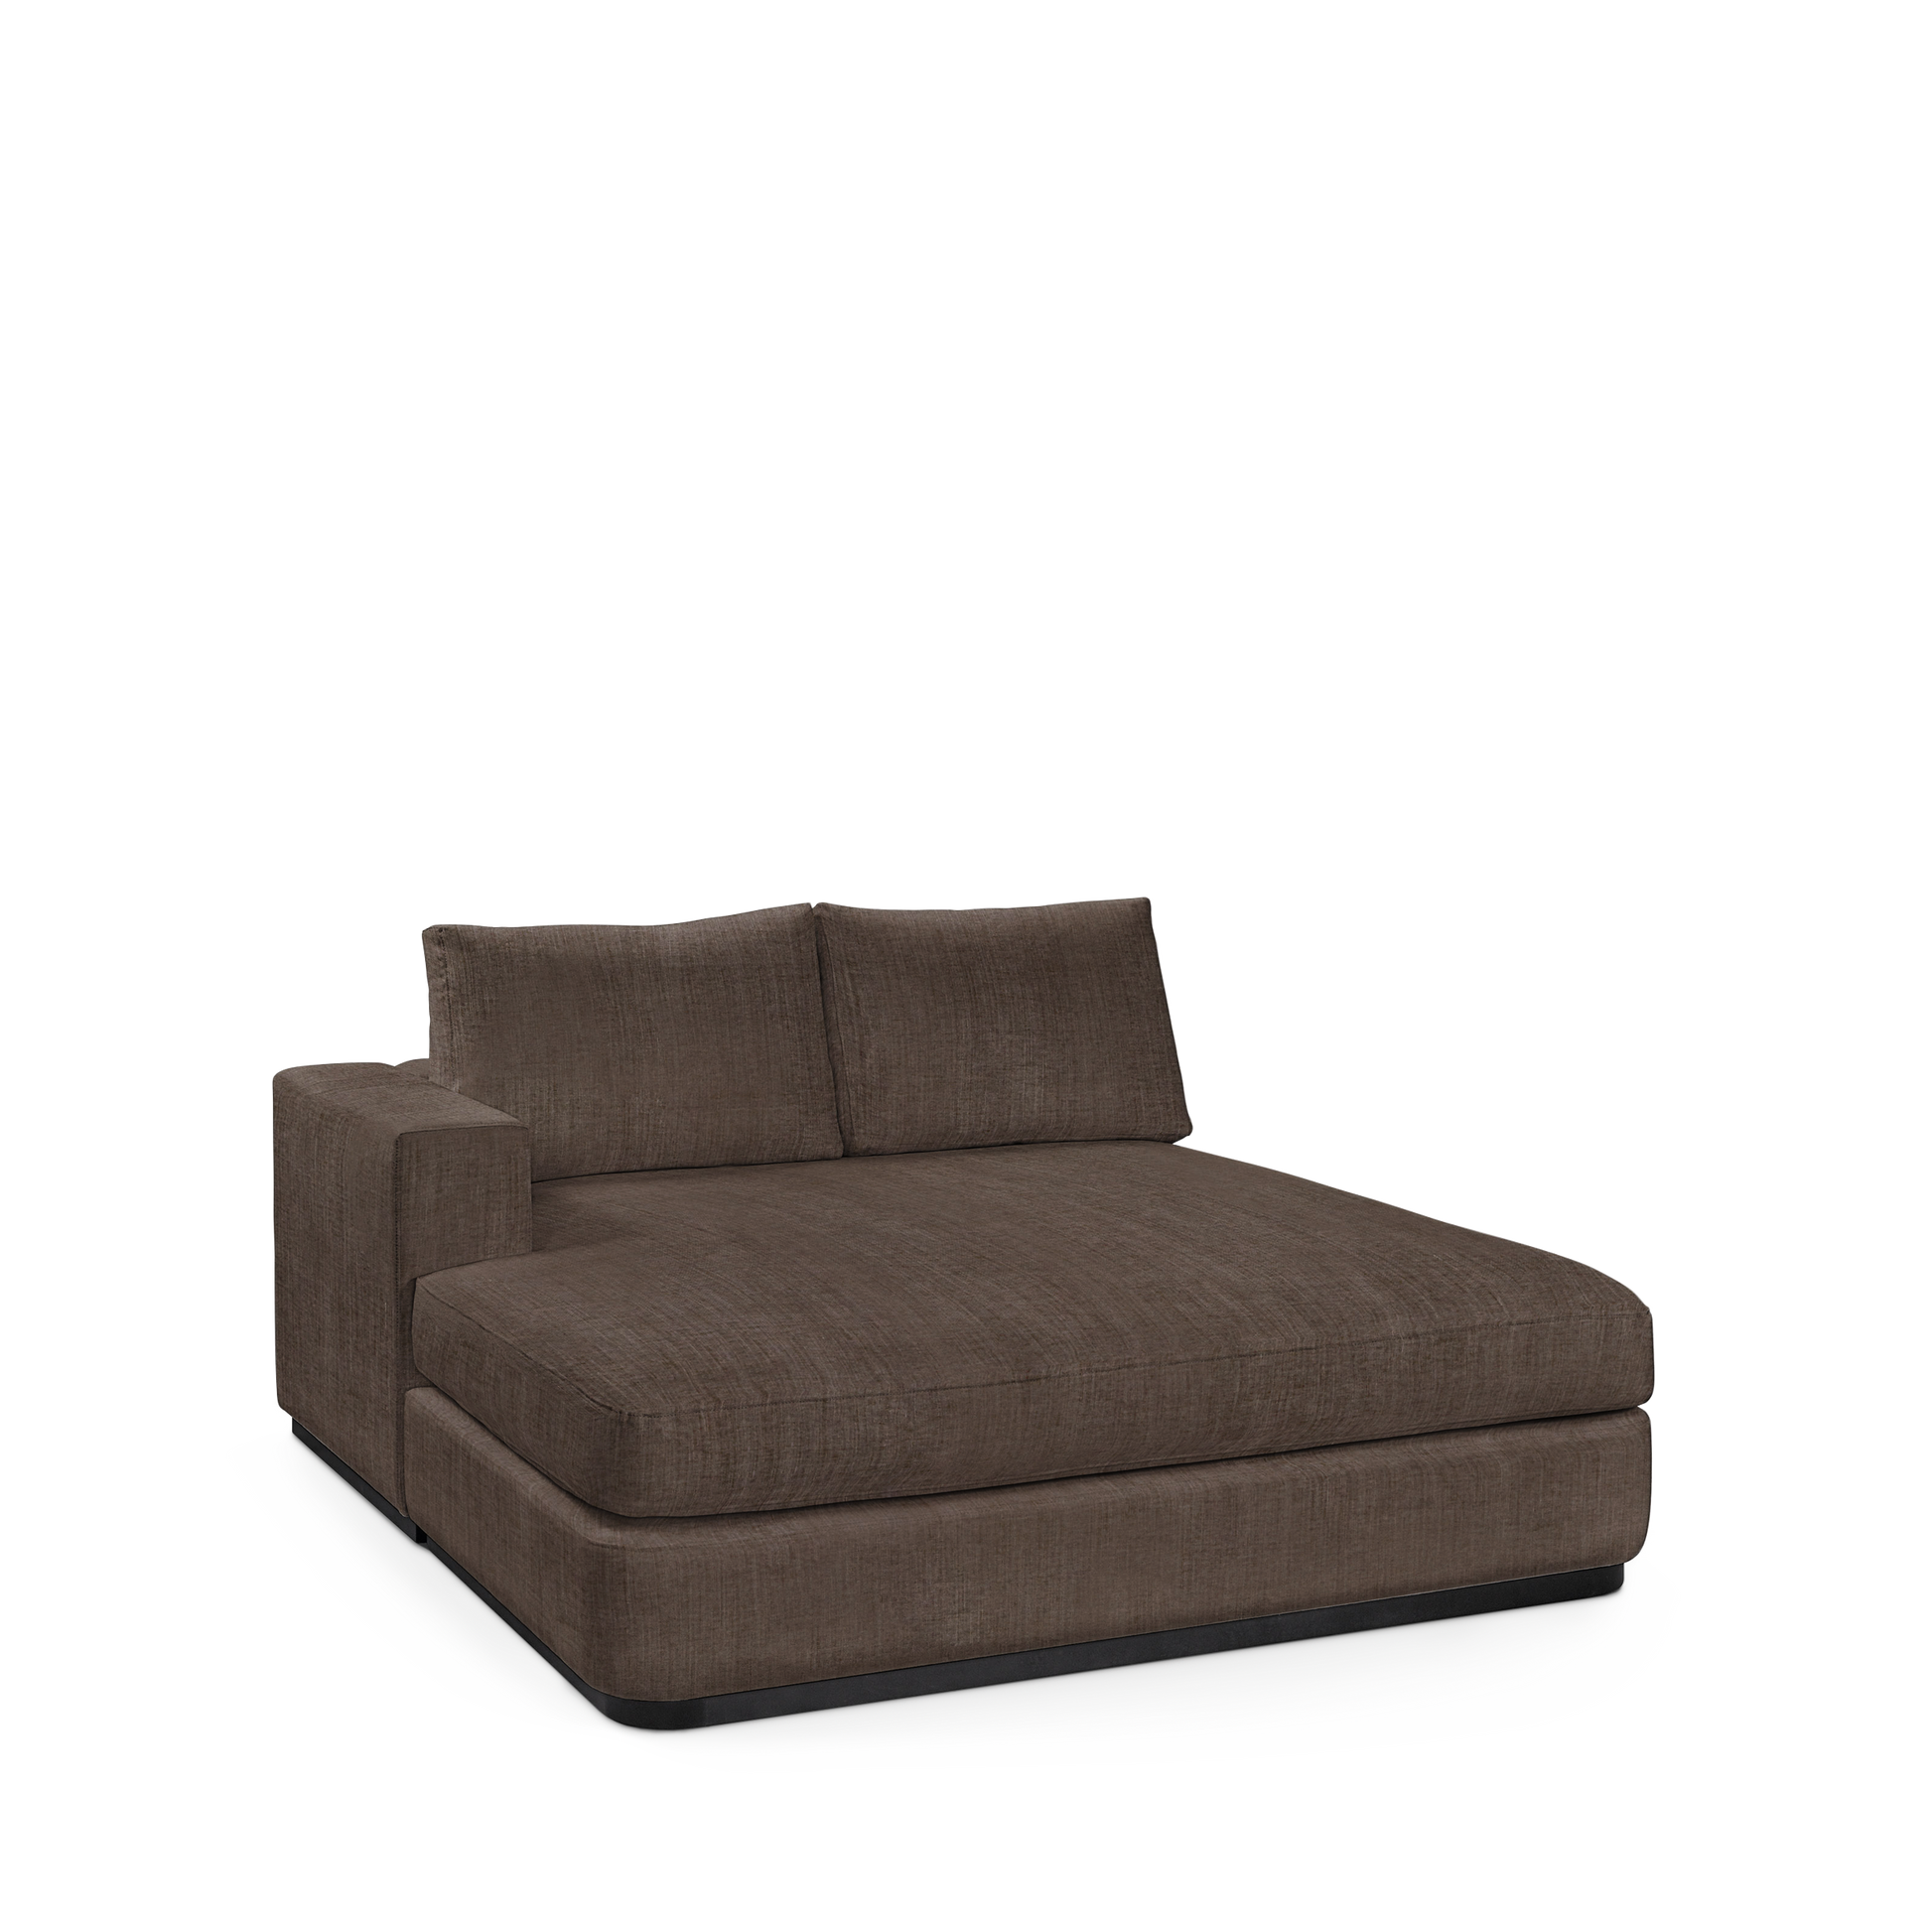 ATLAS 160 Lounge Bed arm rest left with warm grey textile